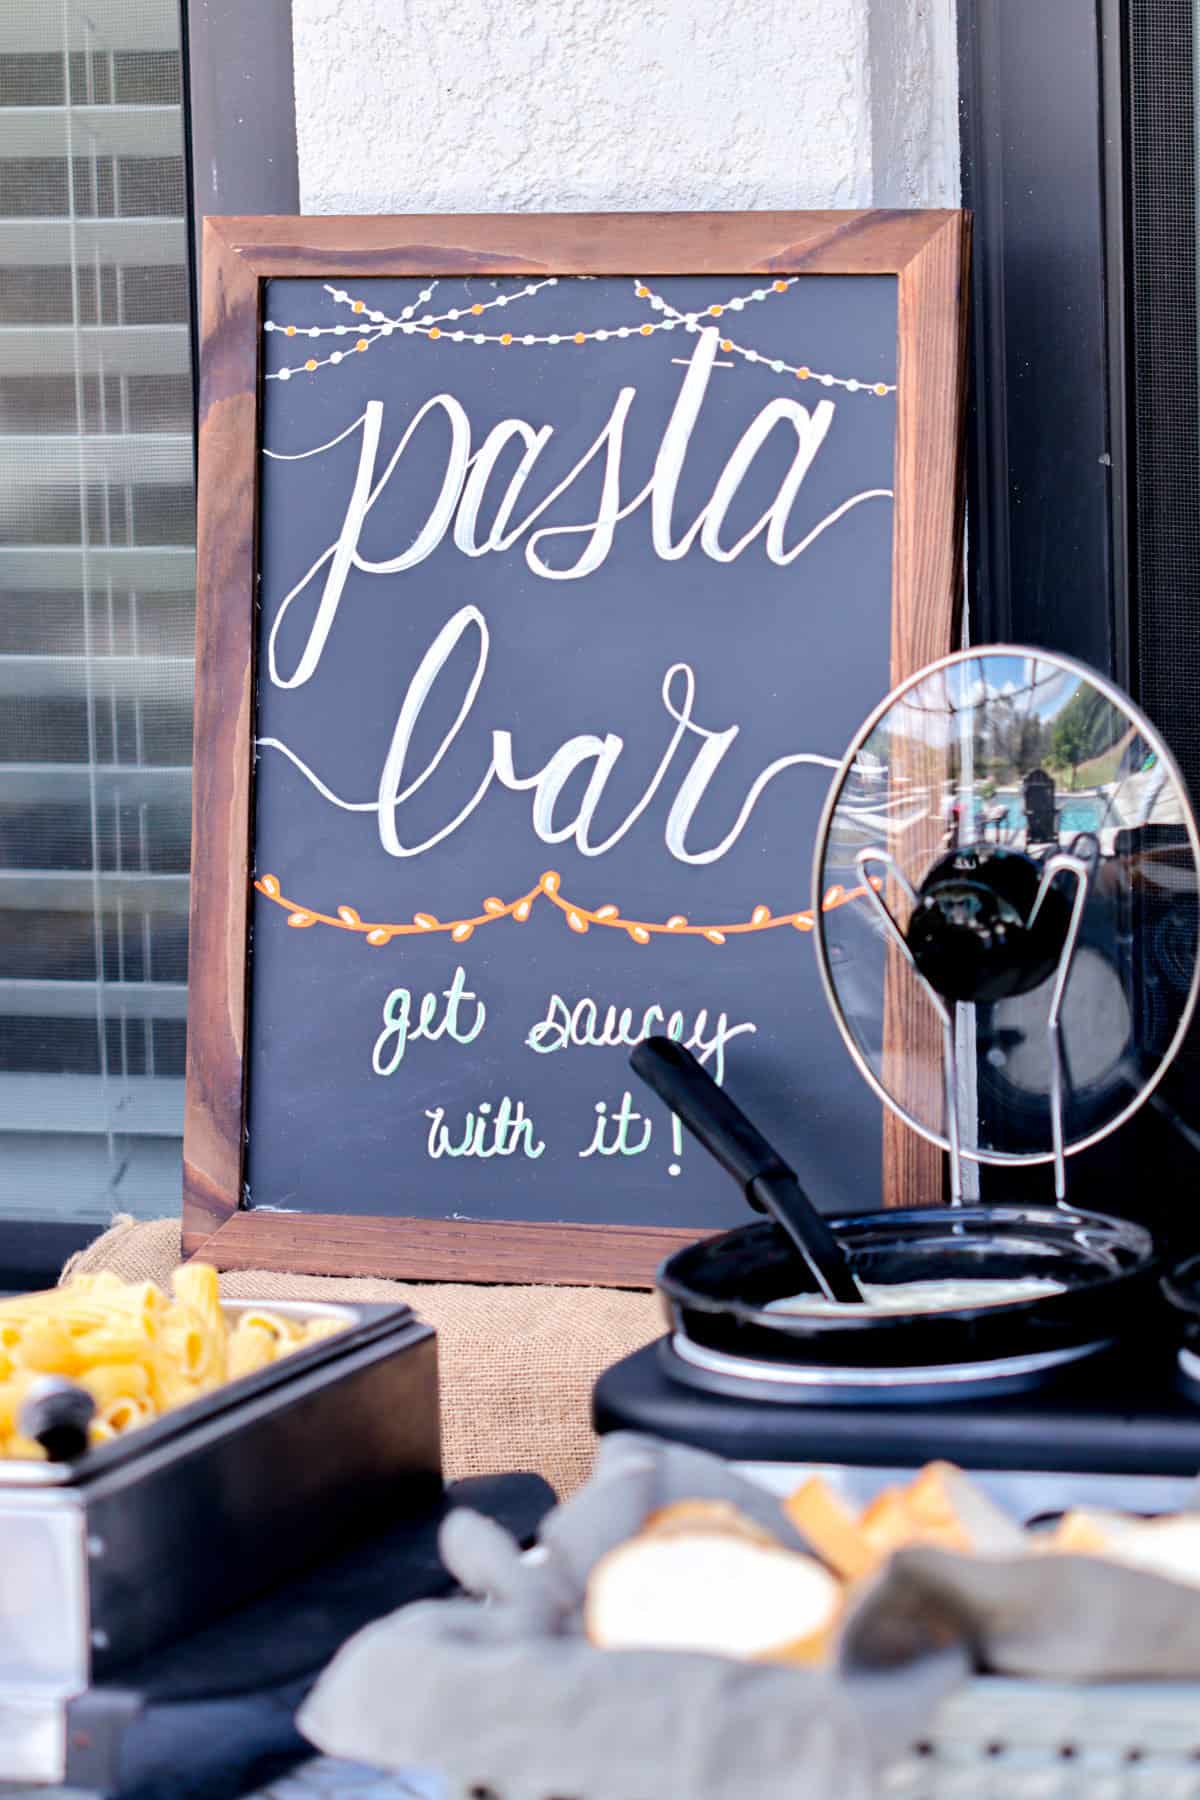 Pasta bar sign on table.